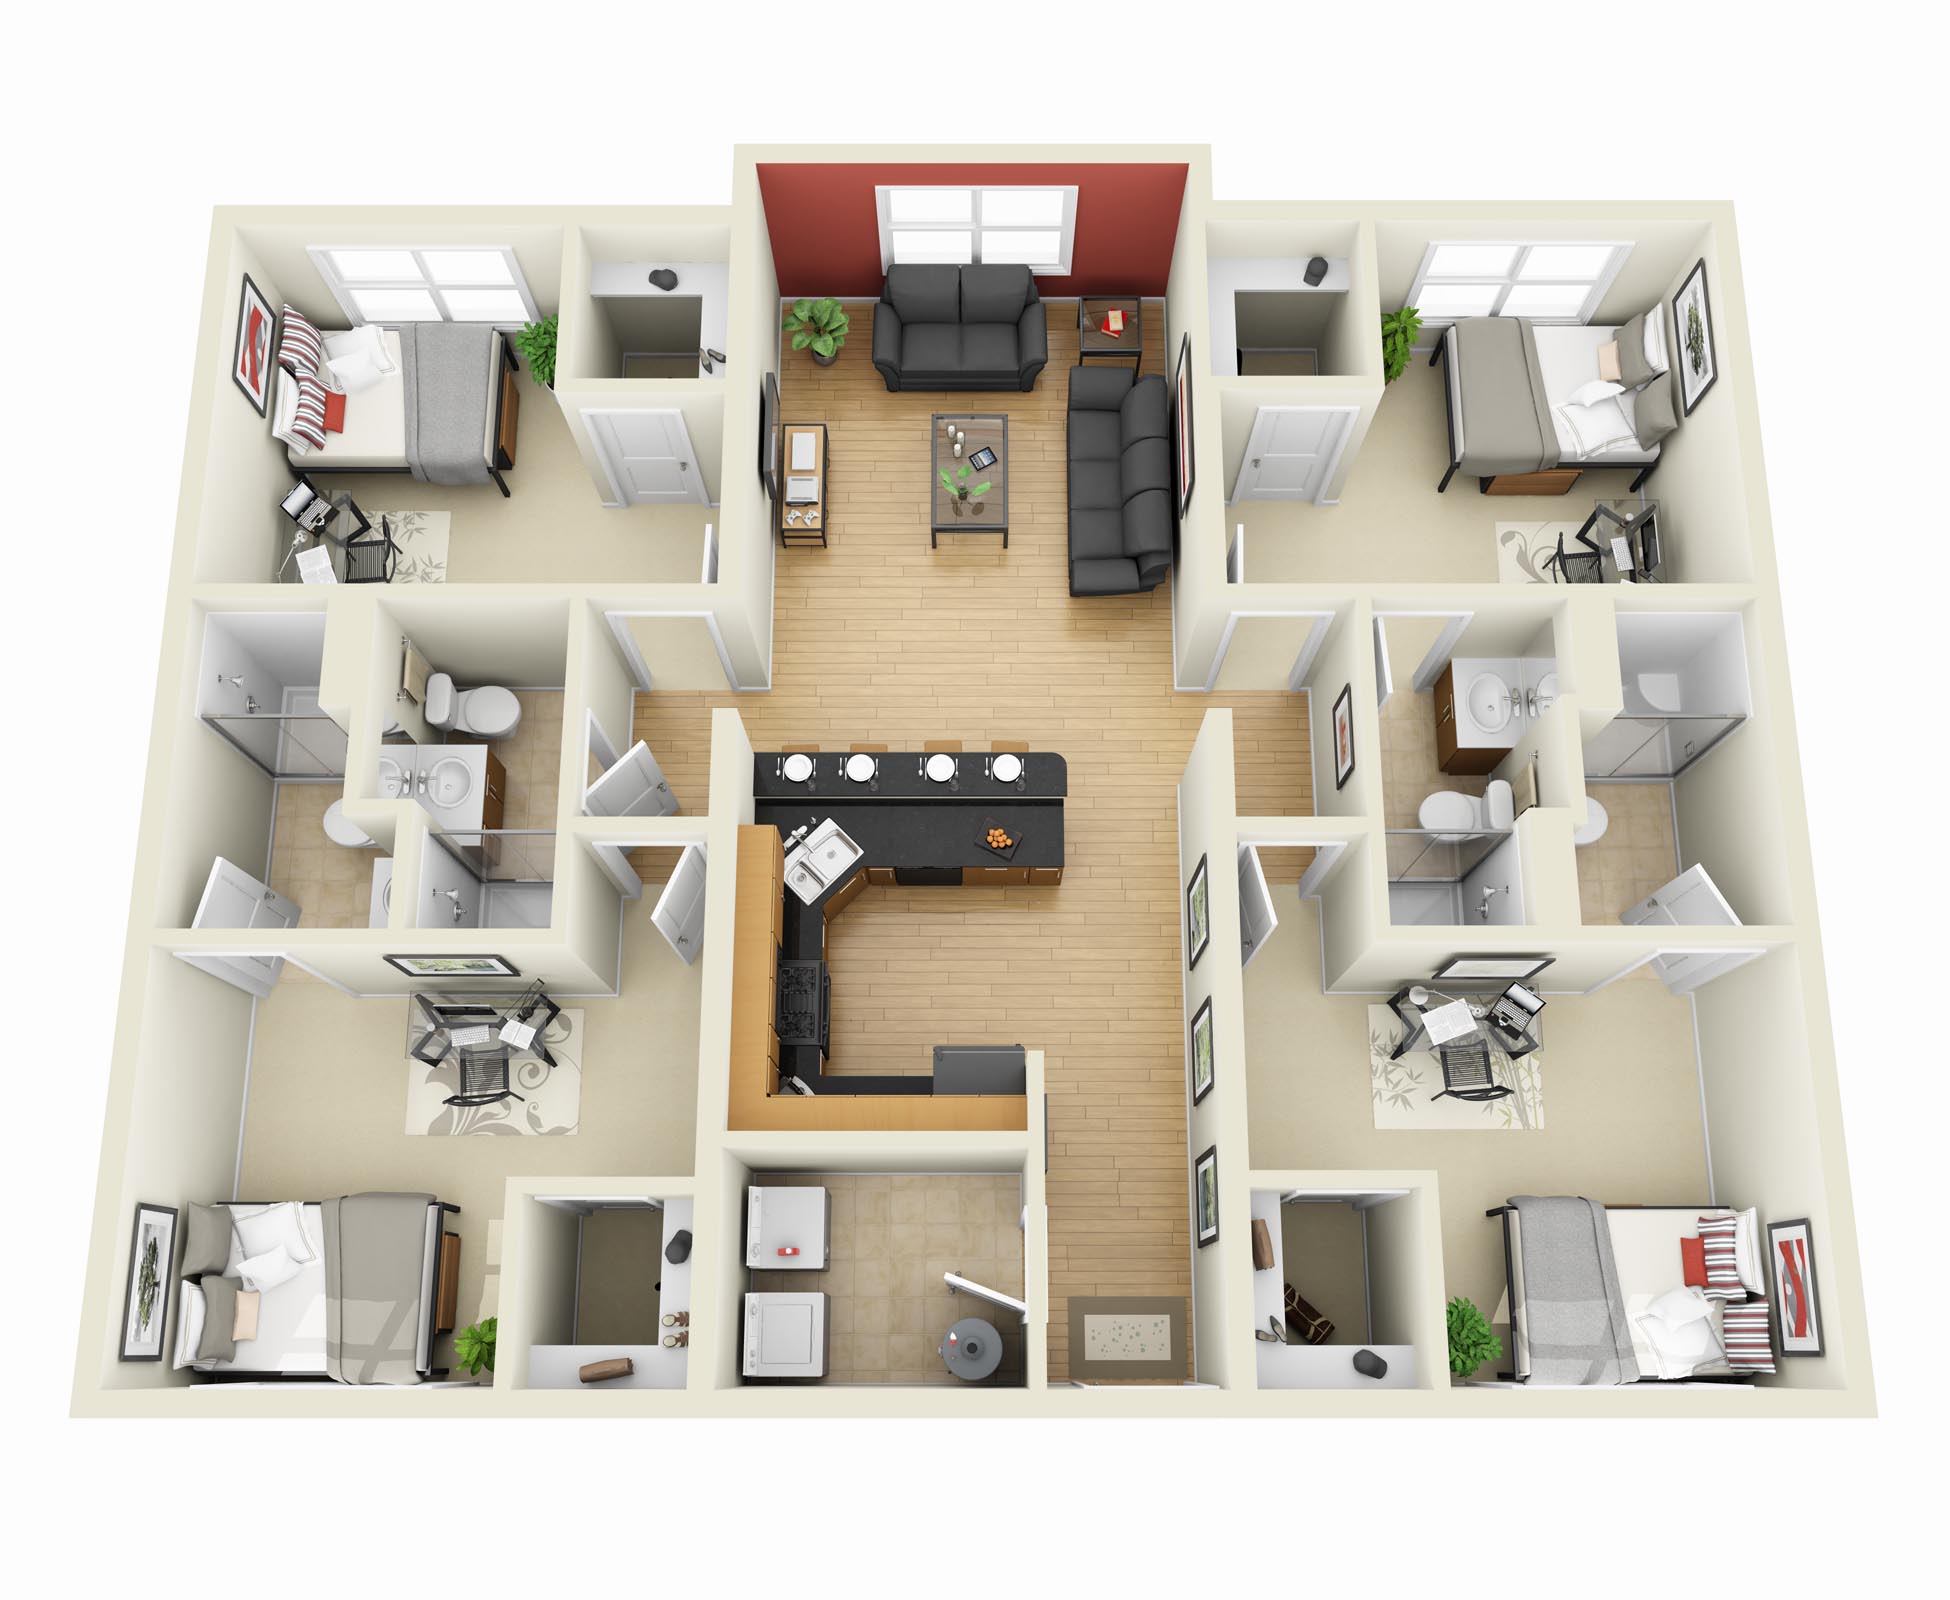 4 Bedroom Apartment/House Plans